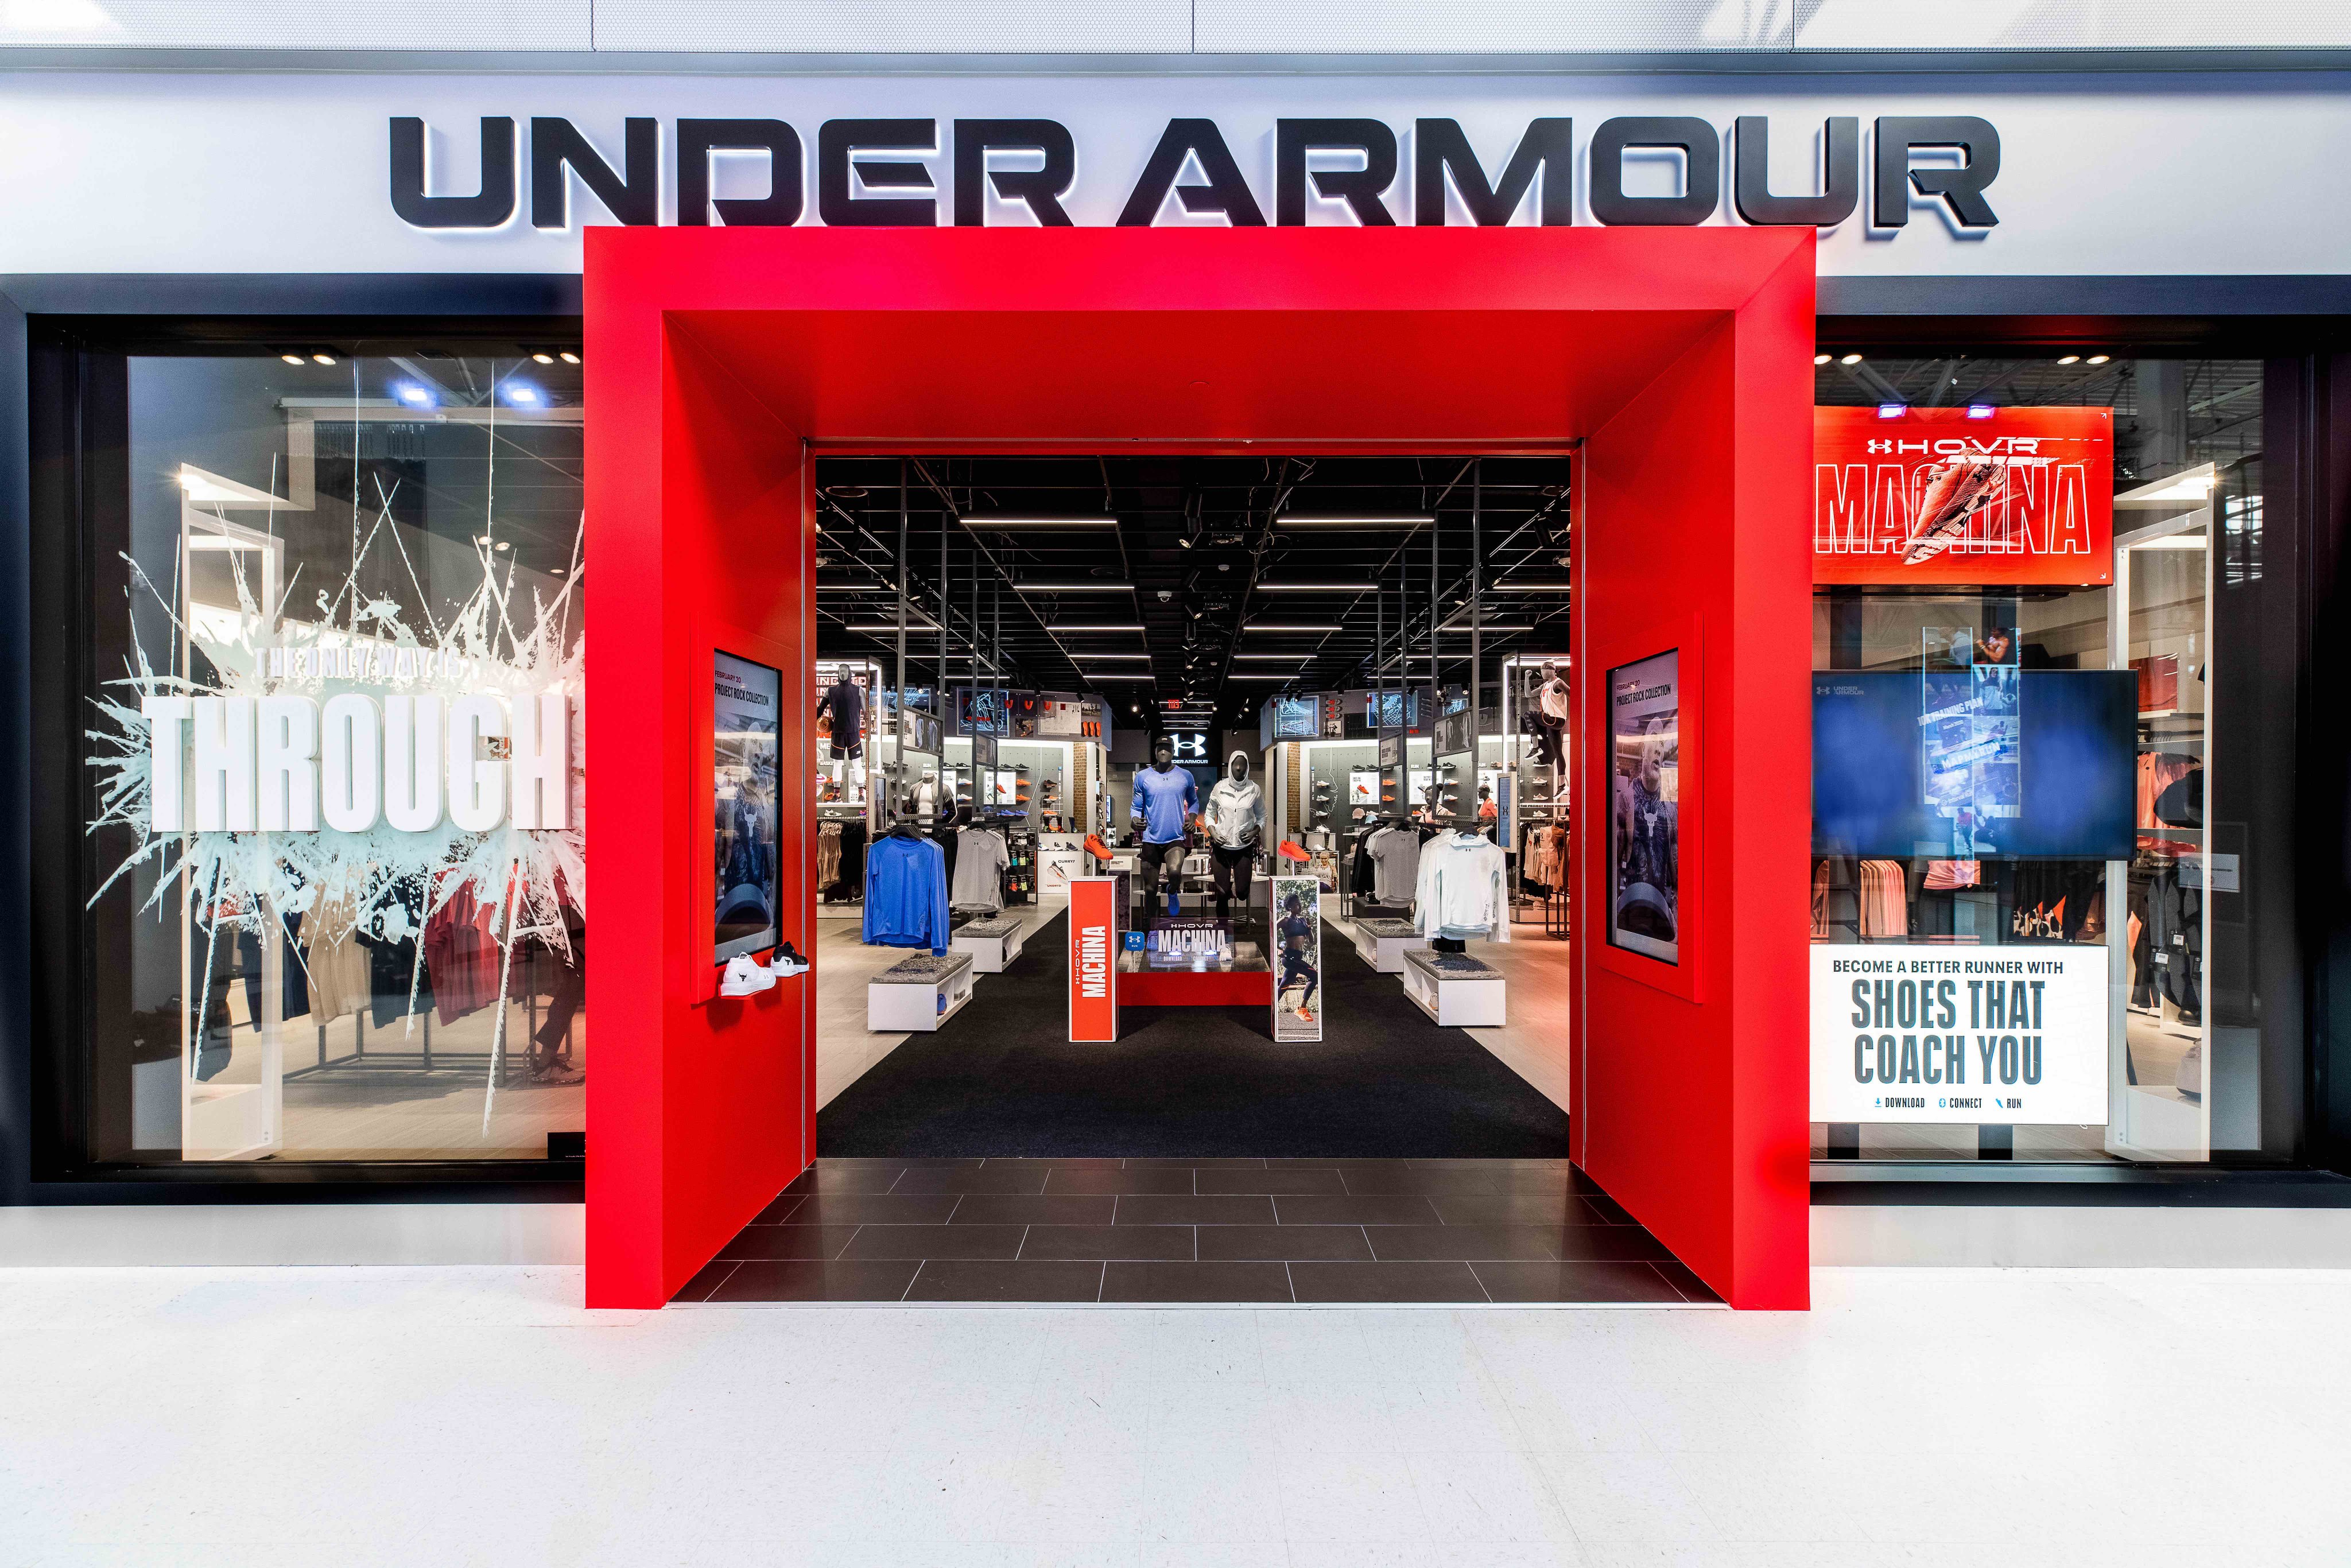 Patrik Frisk on Twitter: "Each and every teammate at @UnderArmour plays a role in bringing our purpose to life. Being recognized one of @Newsweek America's Trustworthy Companies speaks volumes to